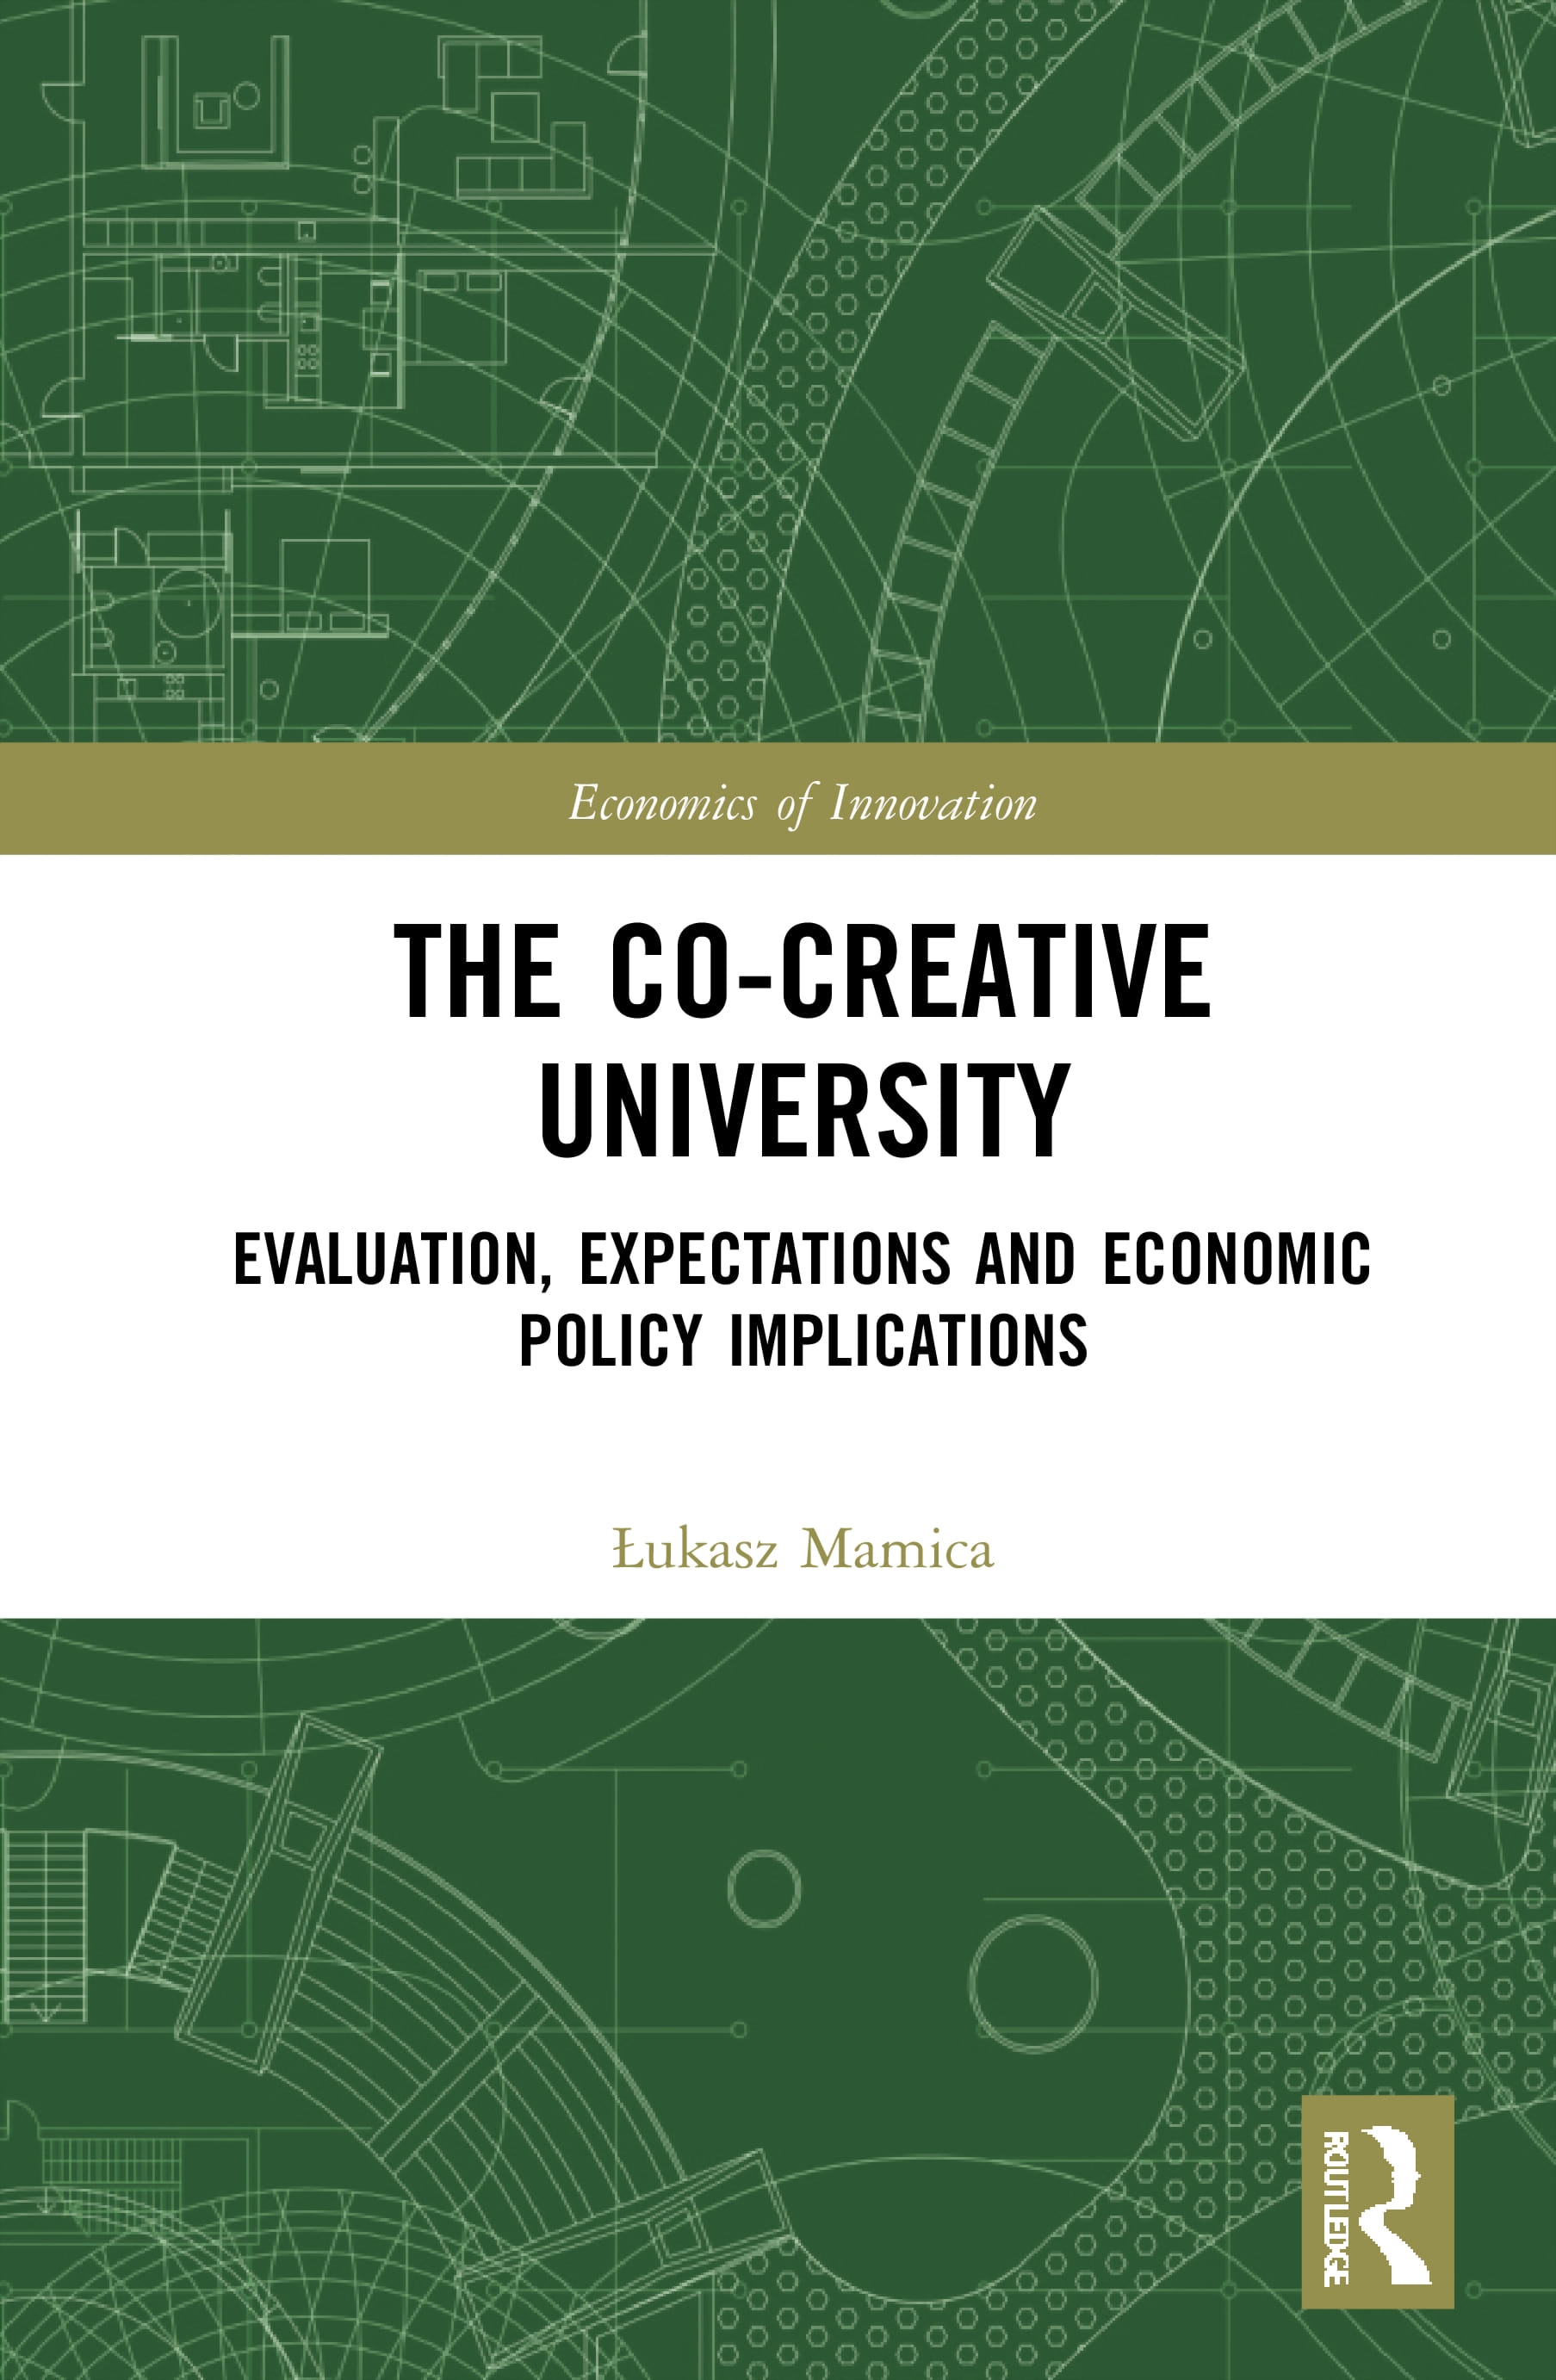 The Co-Creative University: Evaluation, Expectations and Economic Policy Implications